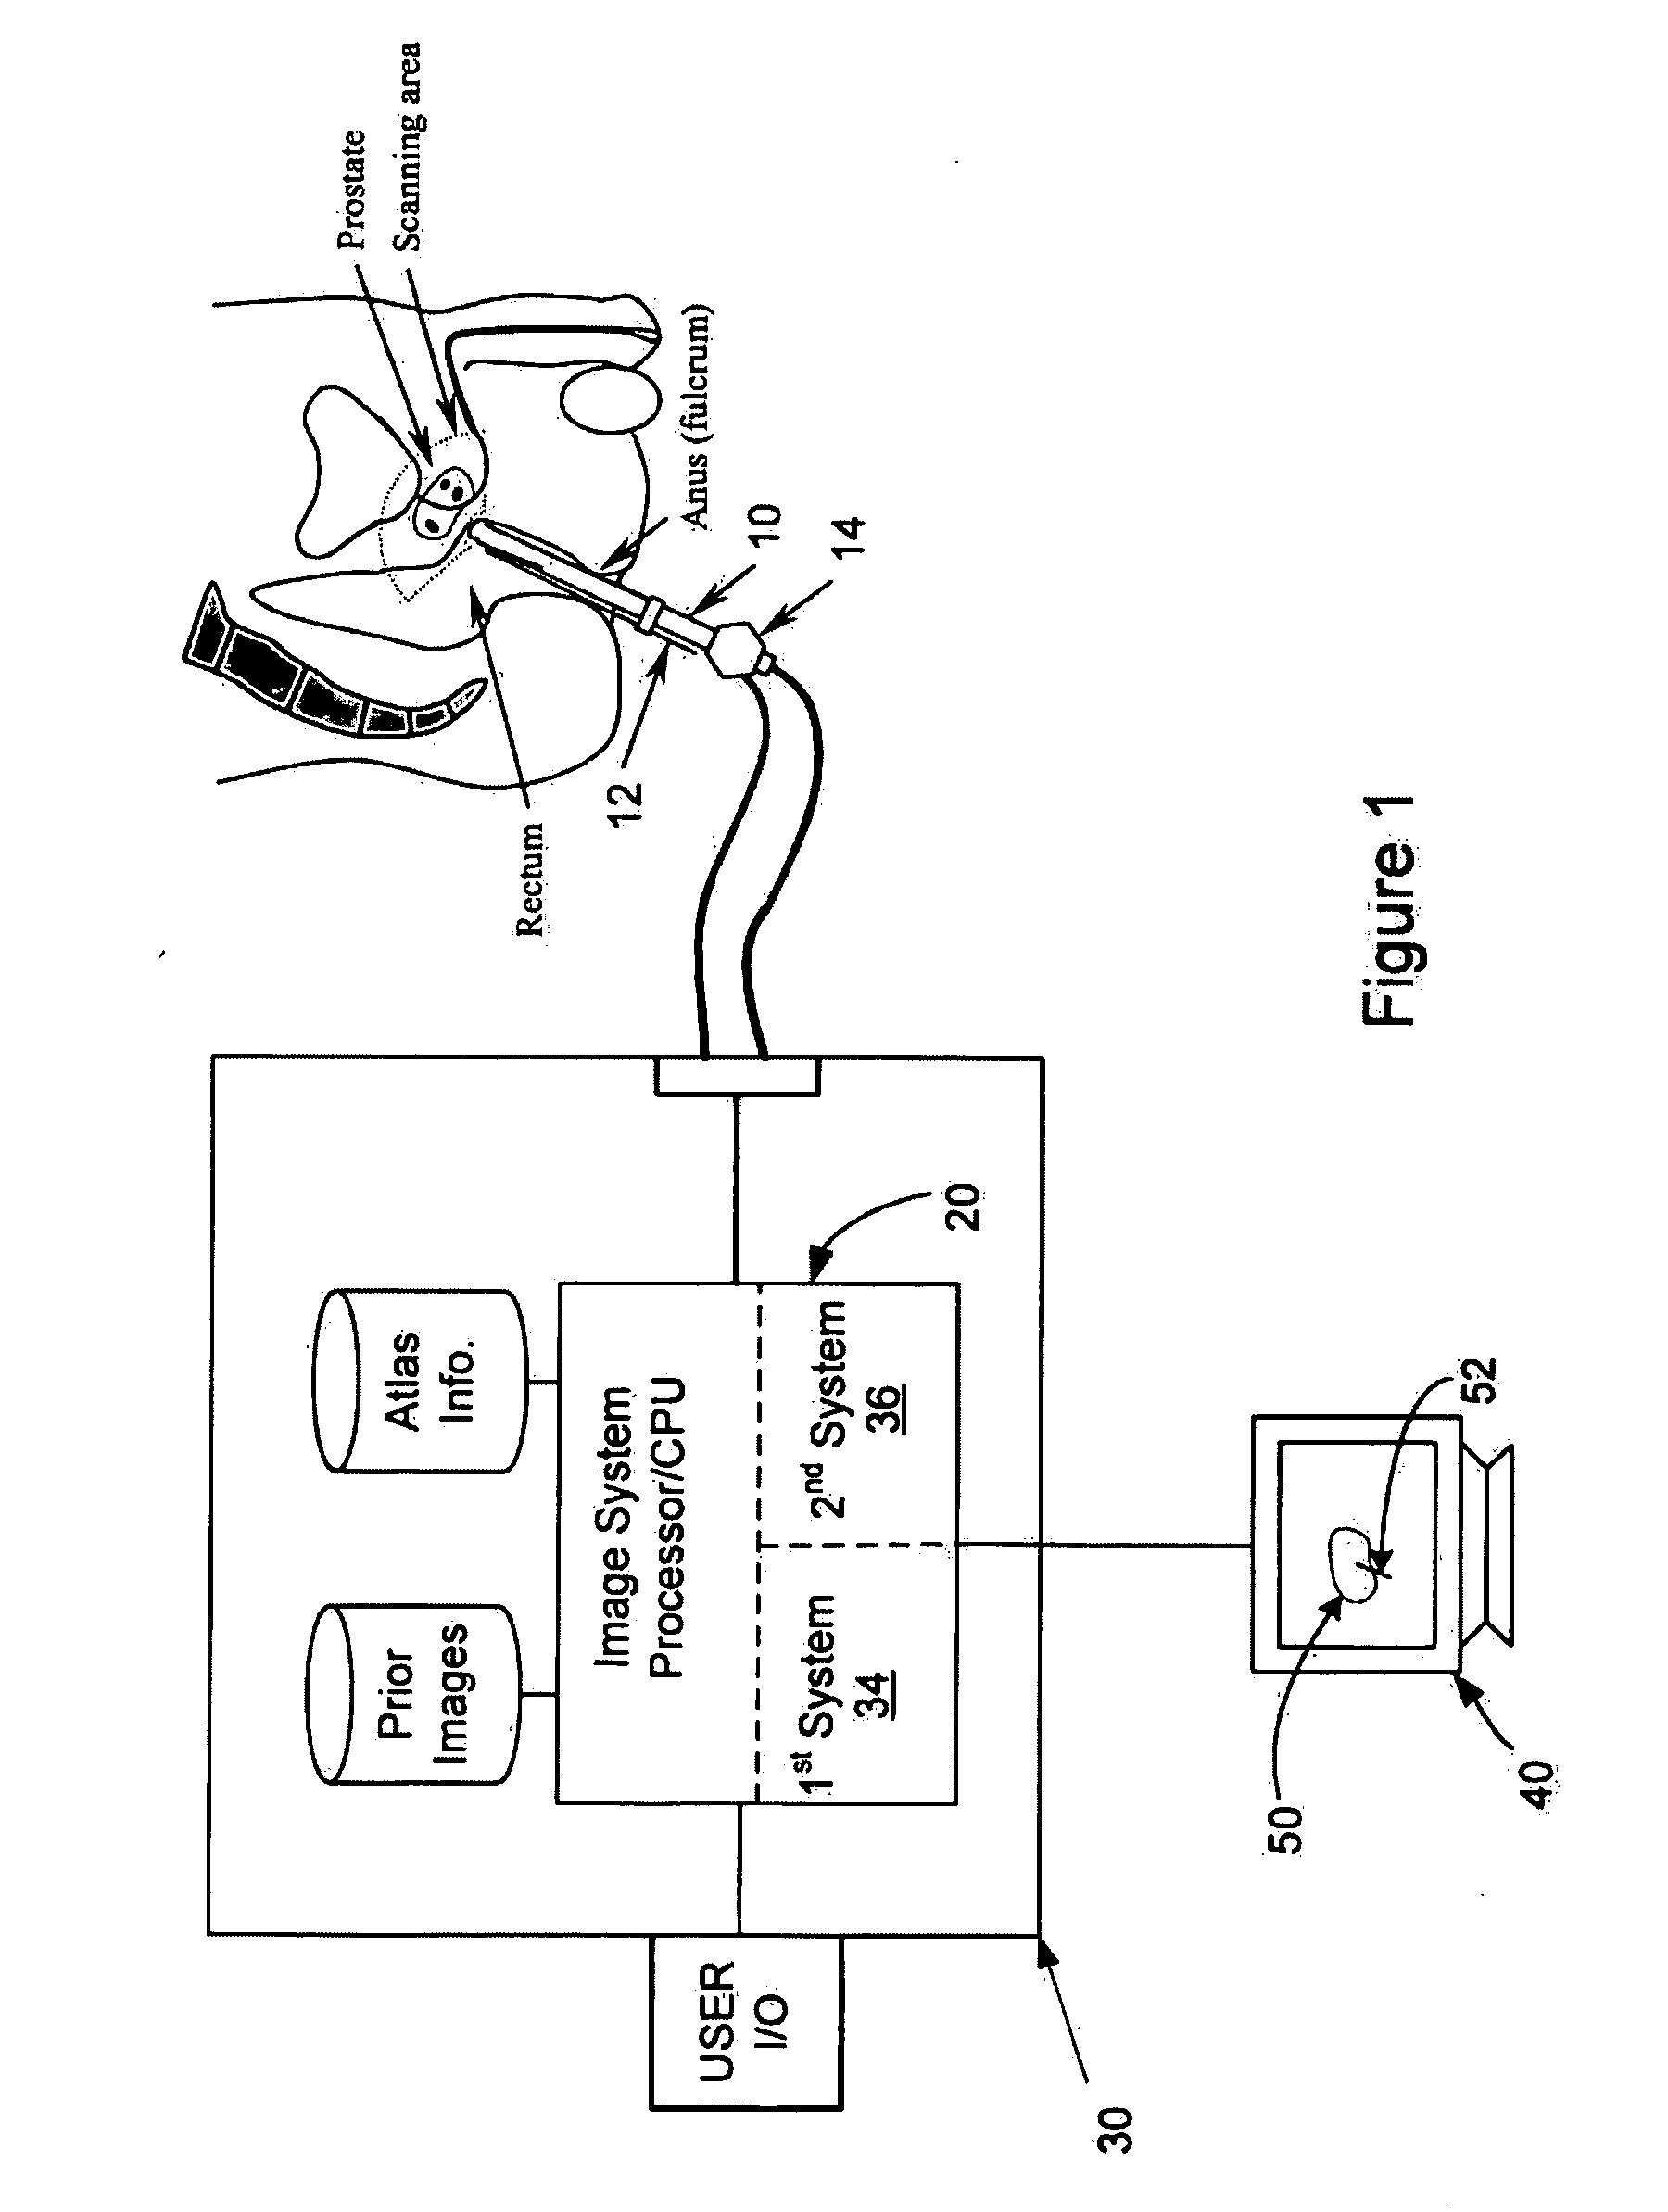 Method for tissue culture extraction